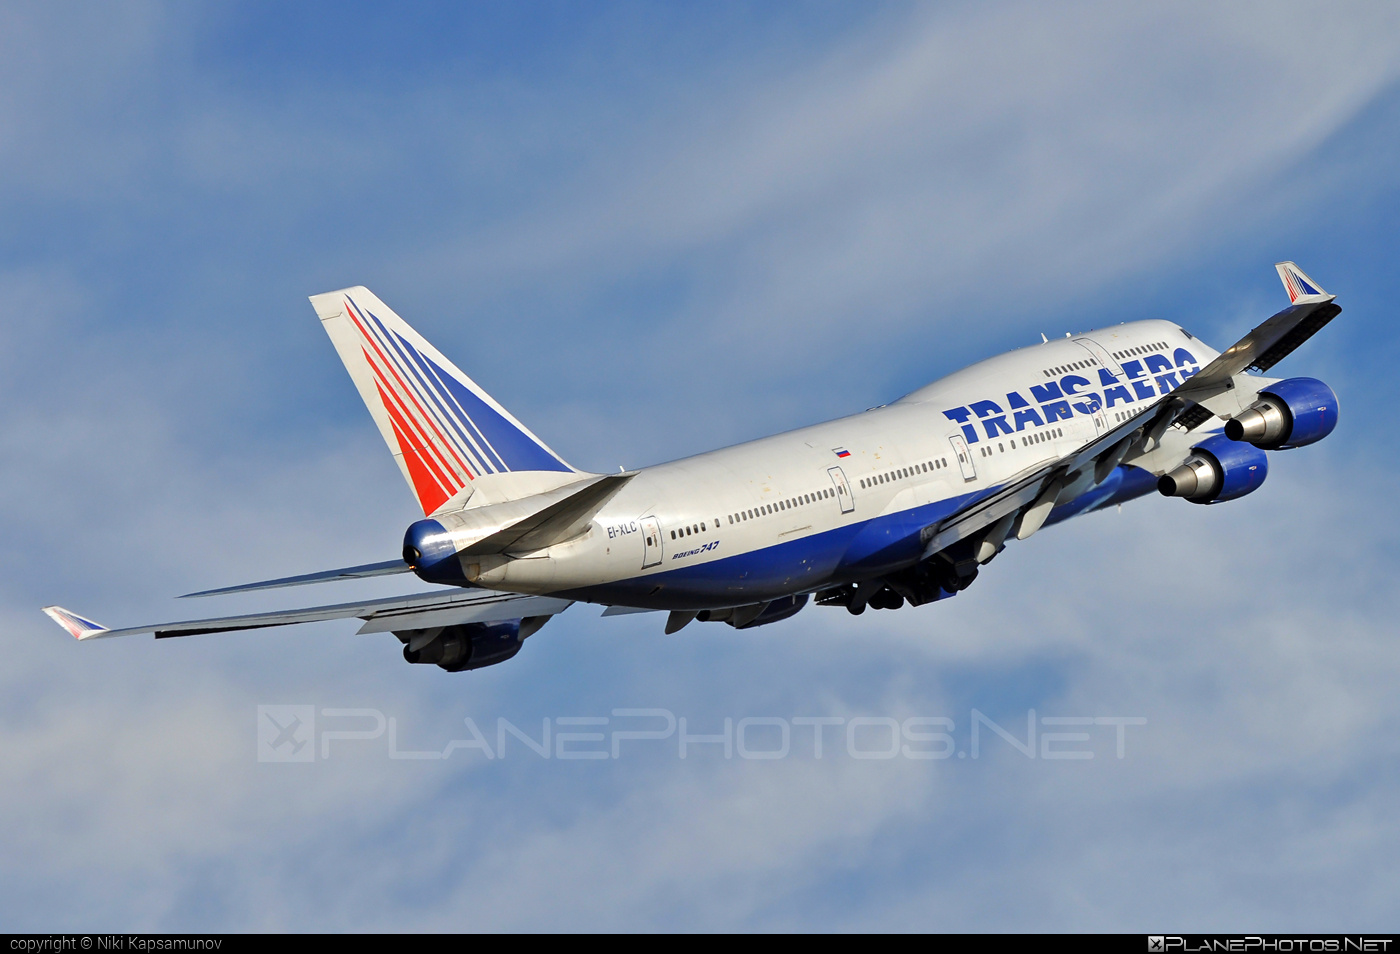 Boeing 747-400 - EI-XLC operated by Transaero Airlines #b747 #boeing #boeing747 #jumbo #transaero #transaeroairlines